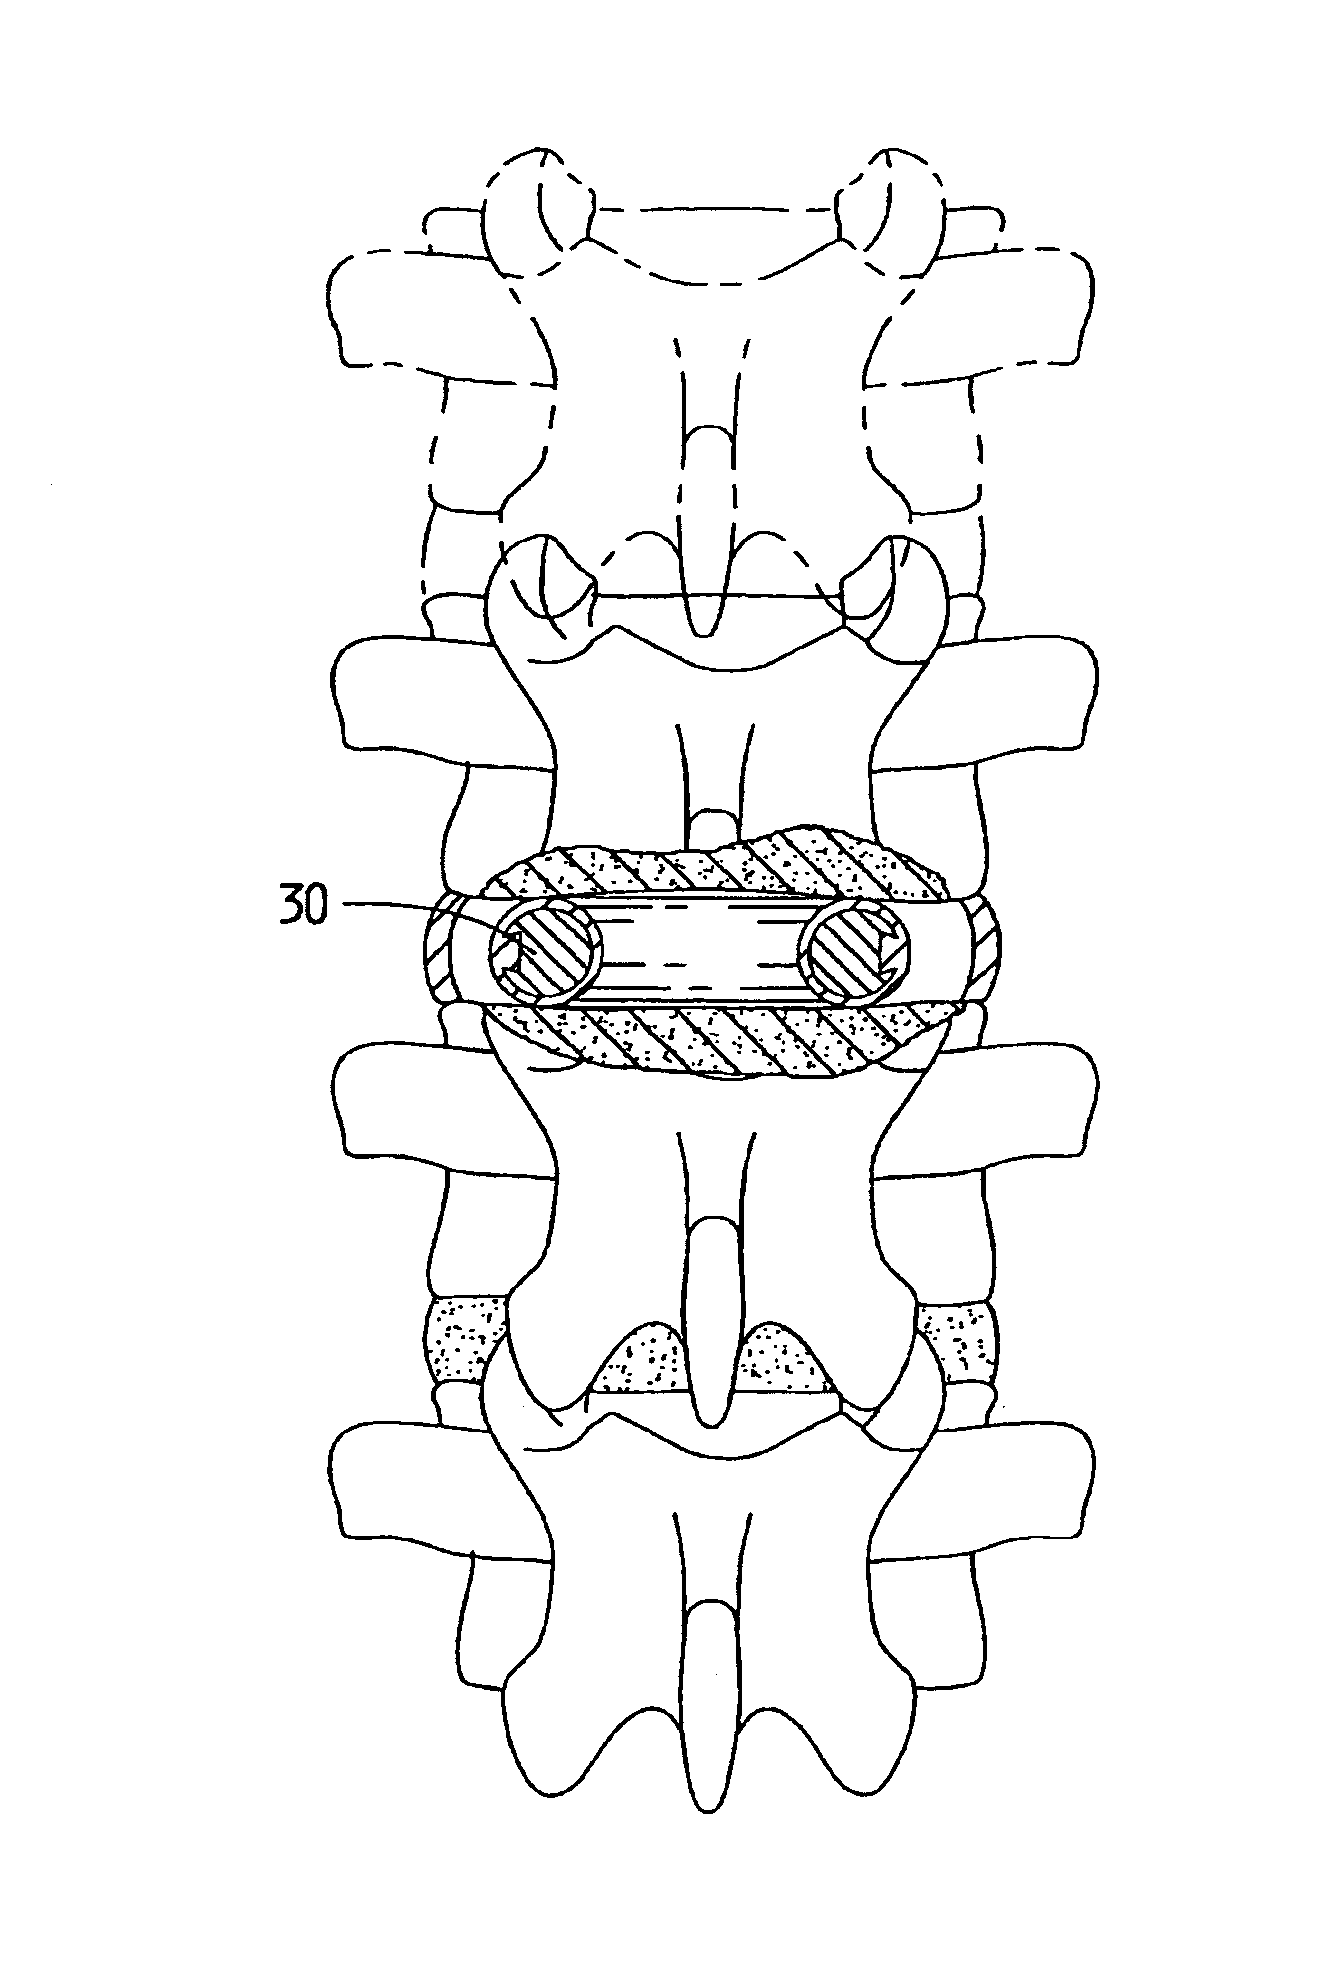 Spinal implant and method of use